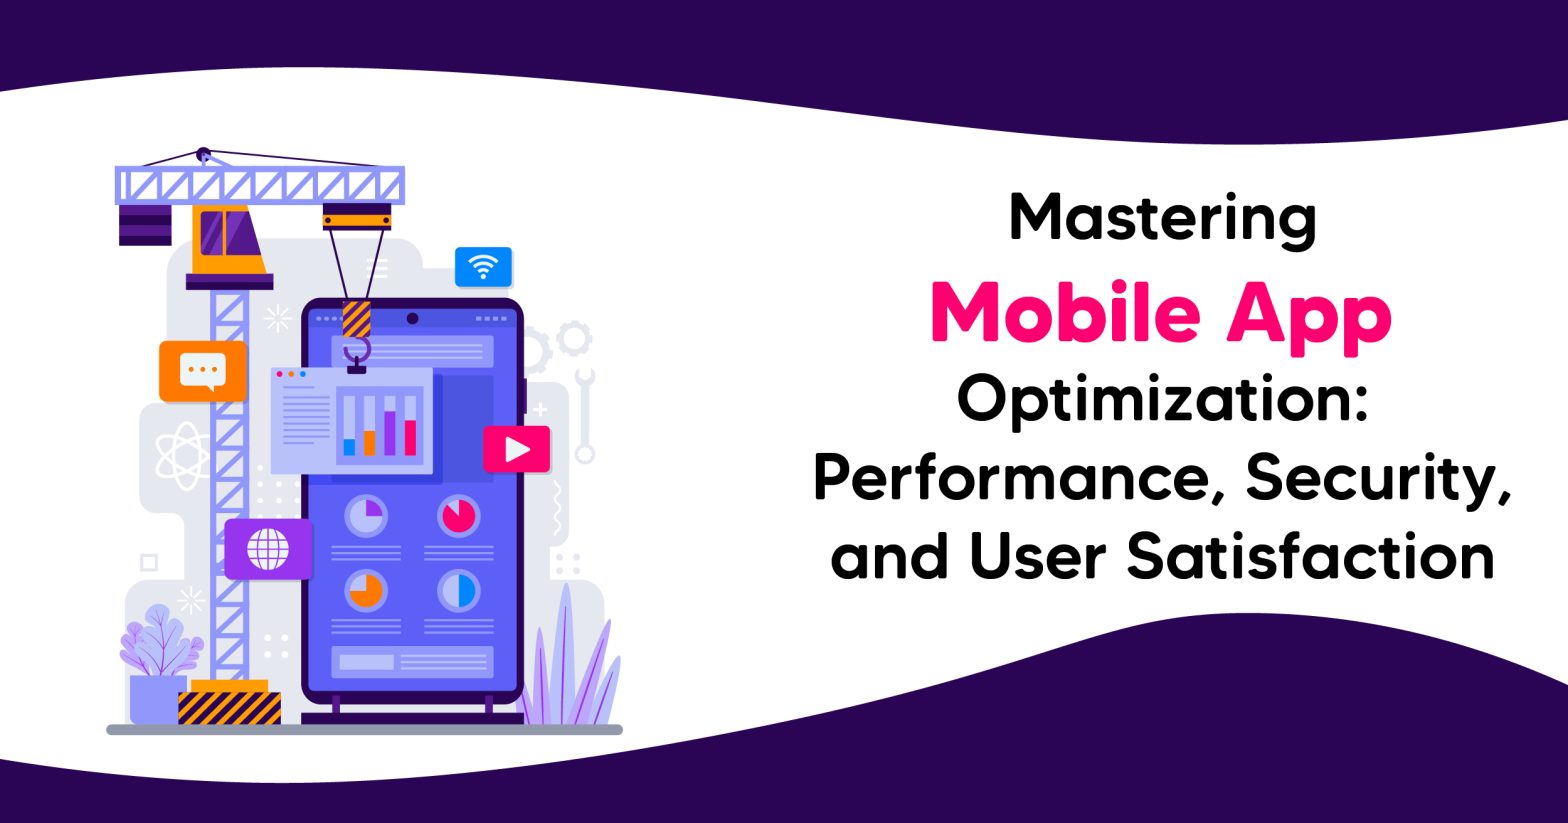 Mastering Mobile App Optimization: Performance, Security, and User Satisfaction